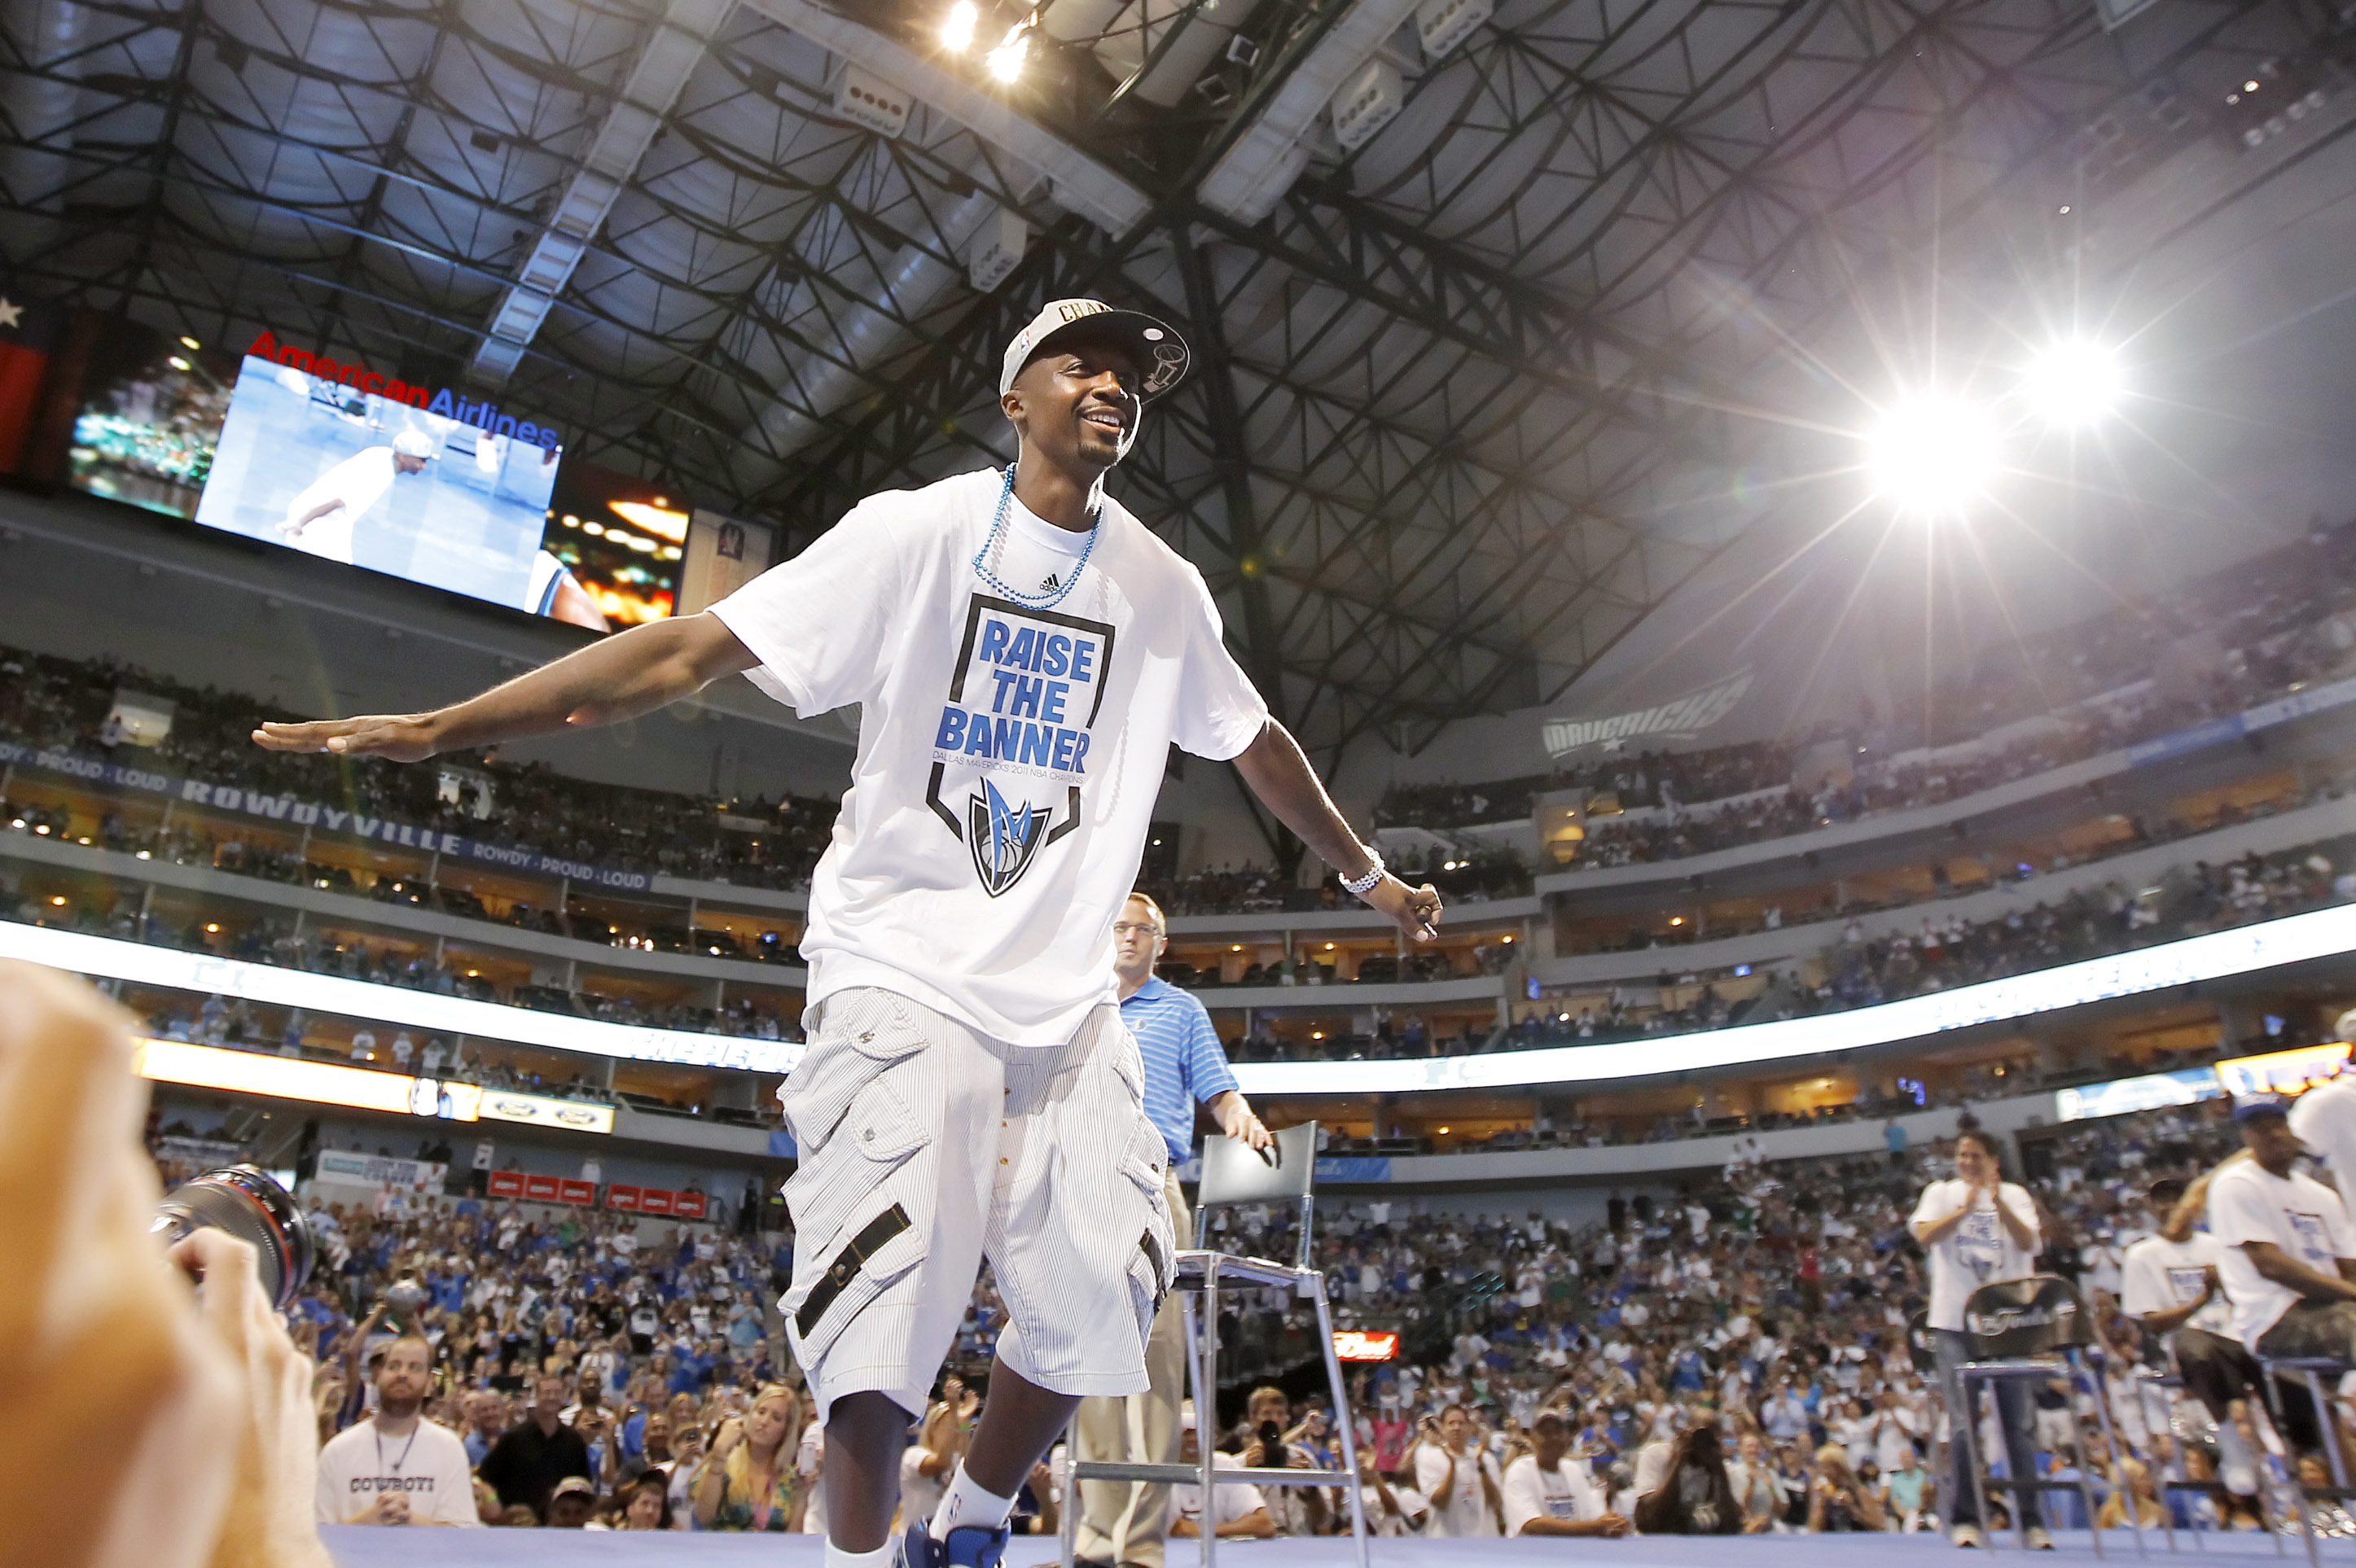 Jason Terry: Very grateful, very thankful to have number retired